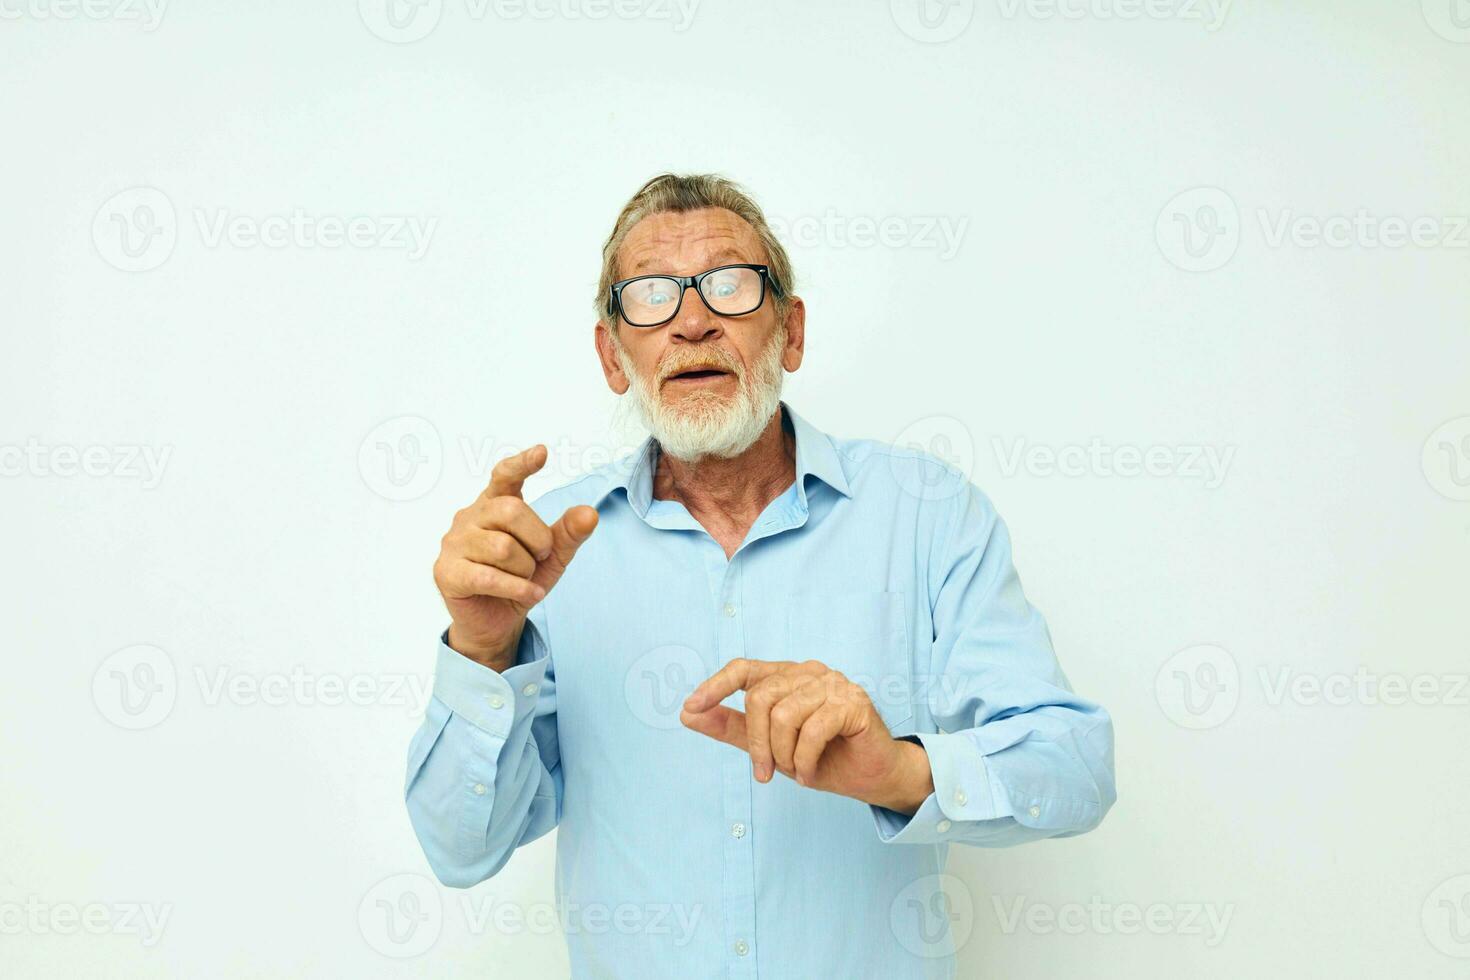 Photo of retired old man in shirt and glasses posing emotions light background